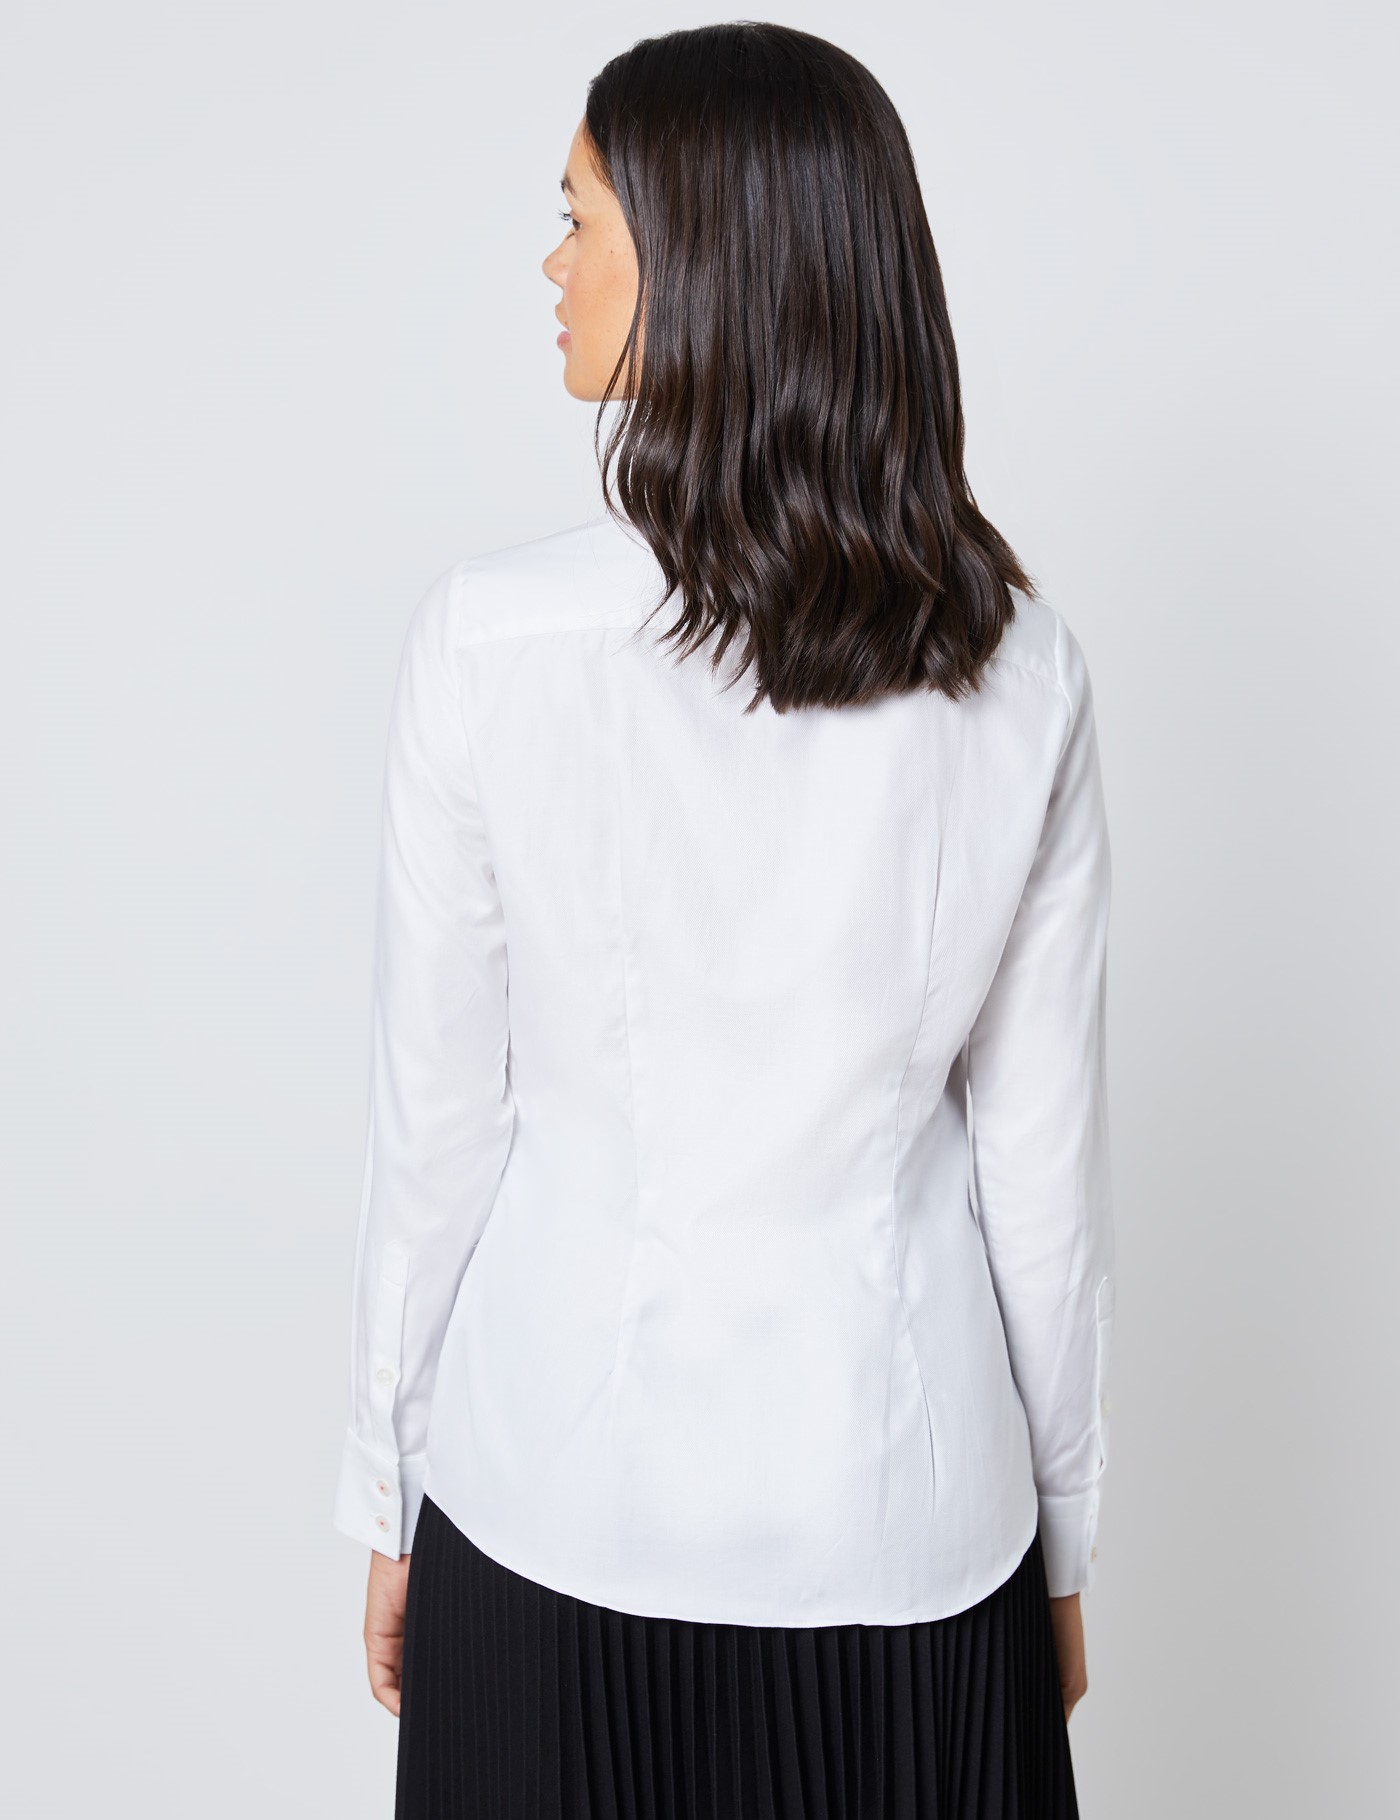 Easy Iron Twill Women's Executive Semi Fitted Shirt with Single Cuffs ...